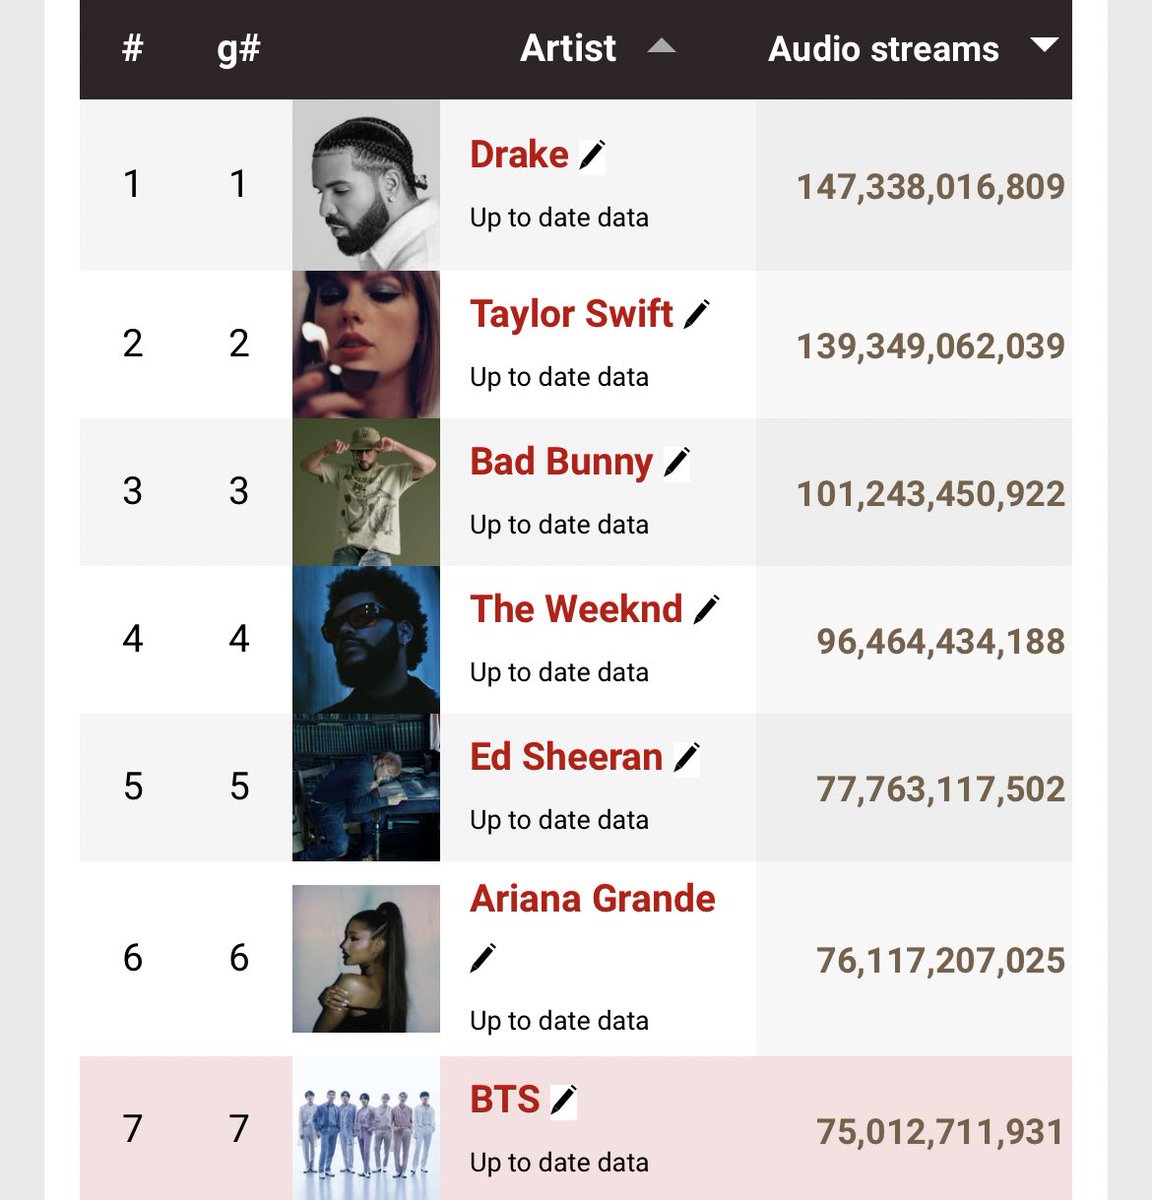 BTS is the FIRST and ONLY Group, Asian and Kpop act to surpass 75B streams on Audio DSPs (Digital Streaming Platforms). They are the 7th most streamed Artist overall.